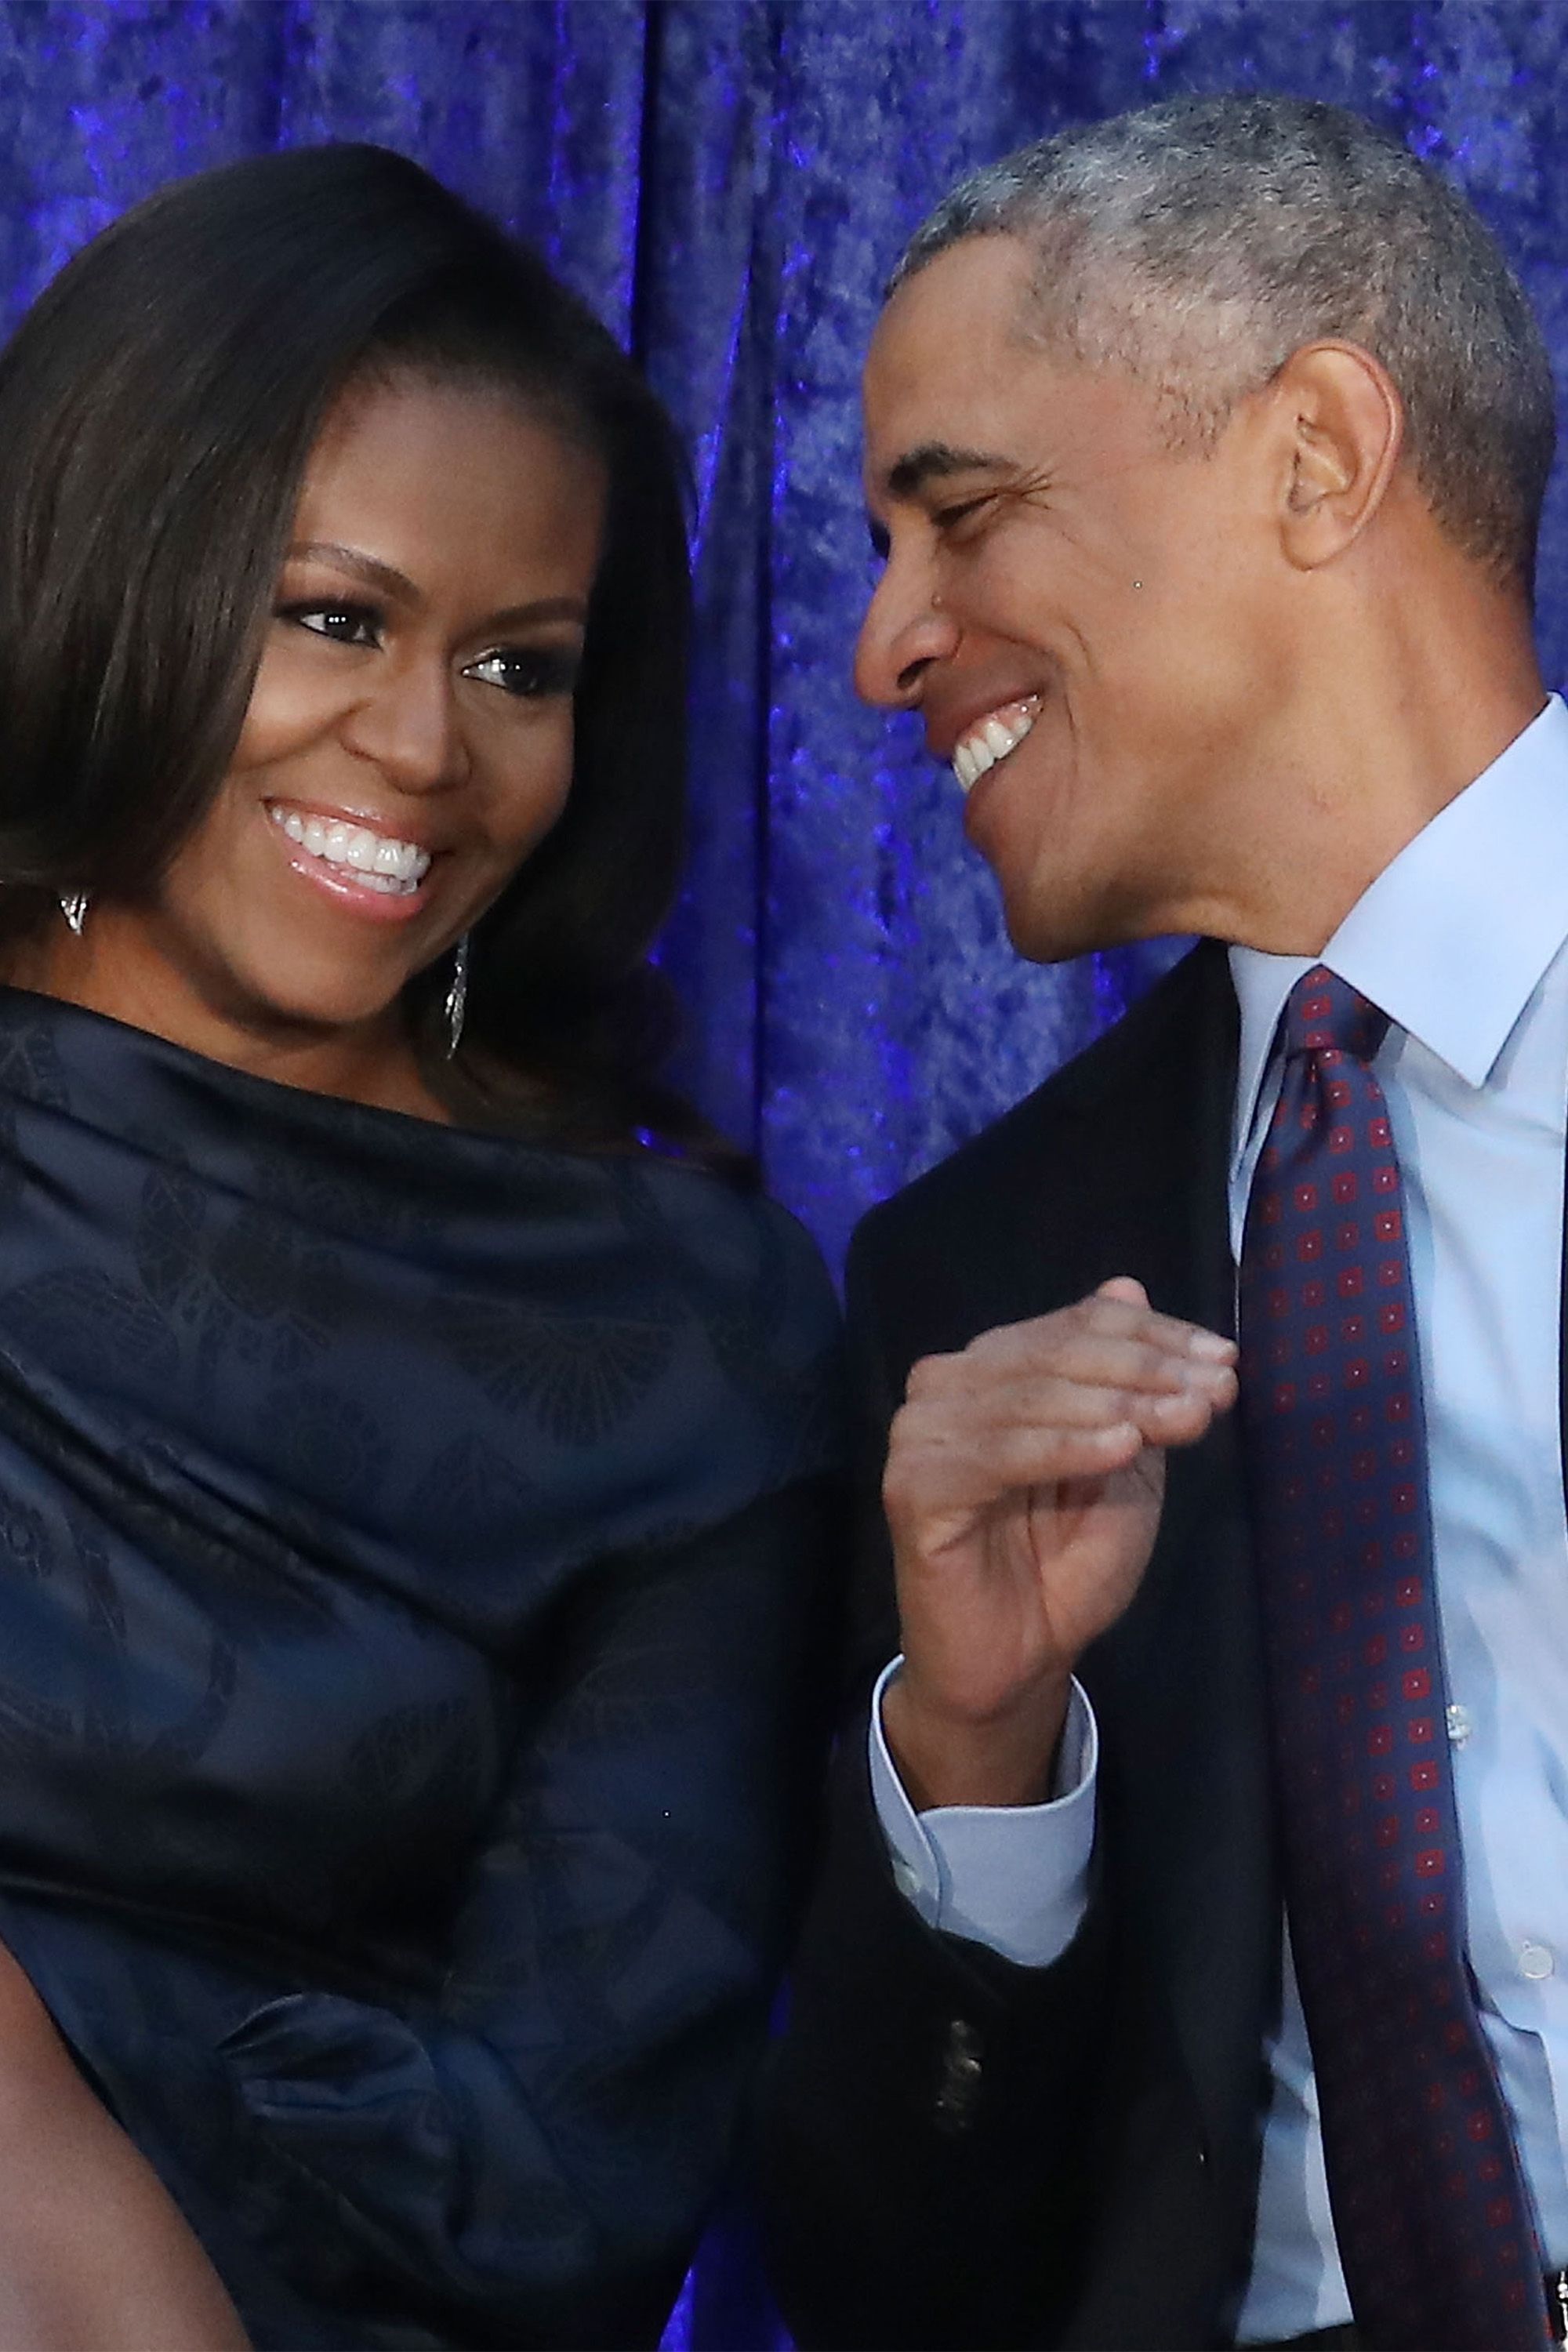 40 Power Couples That Are The Ultimate Couple Goals The Best Power Couples